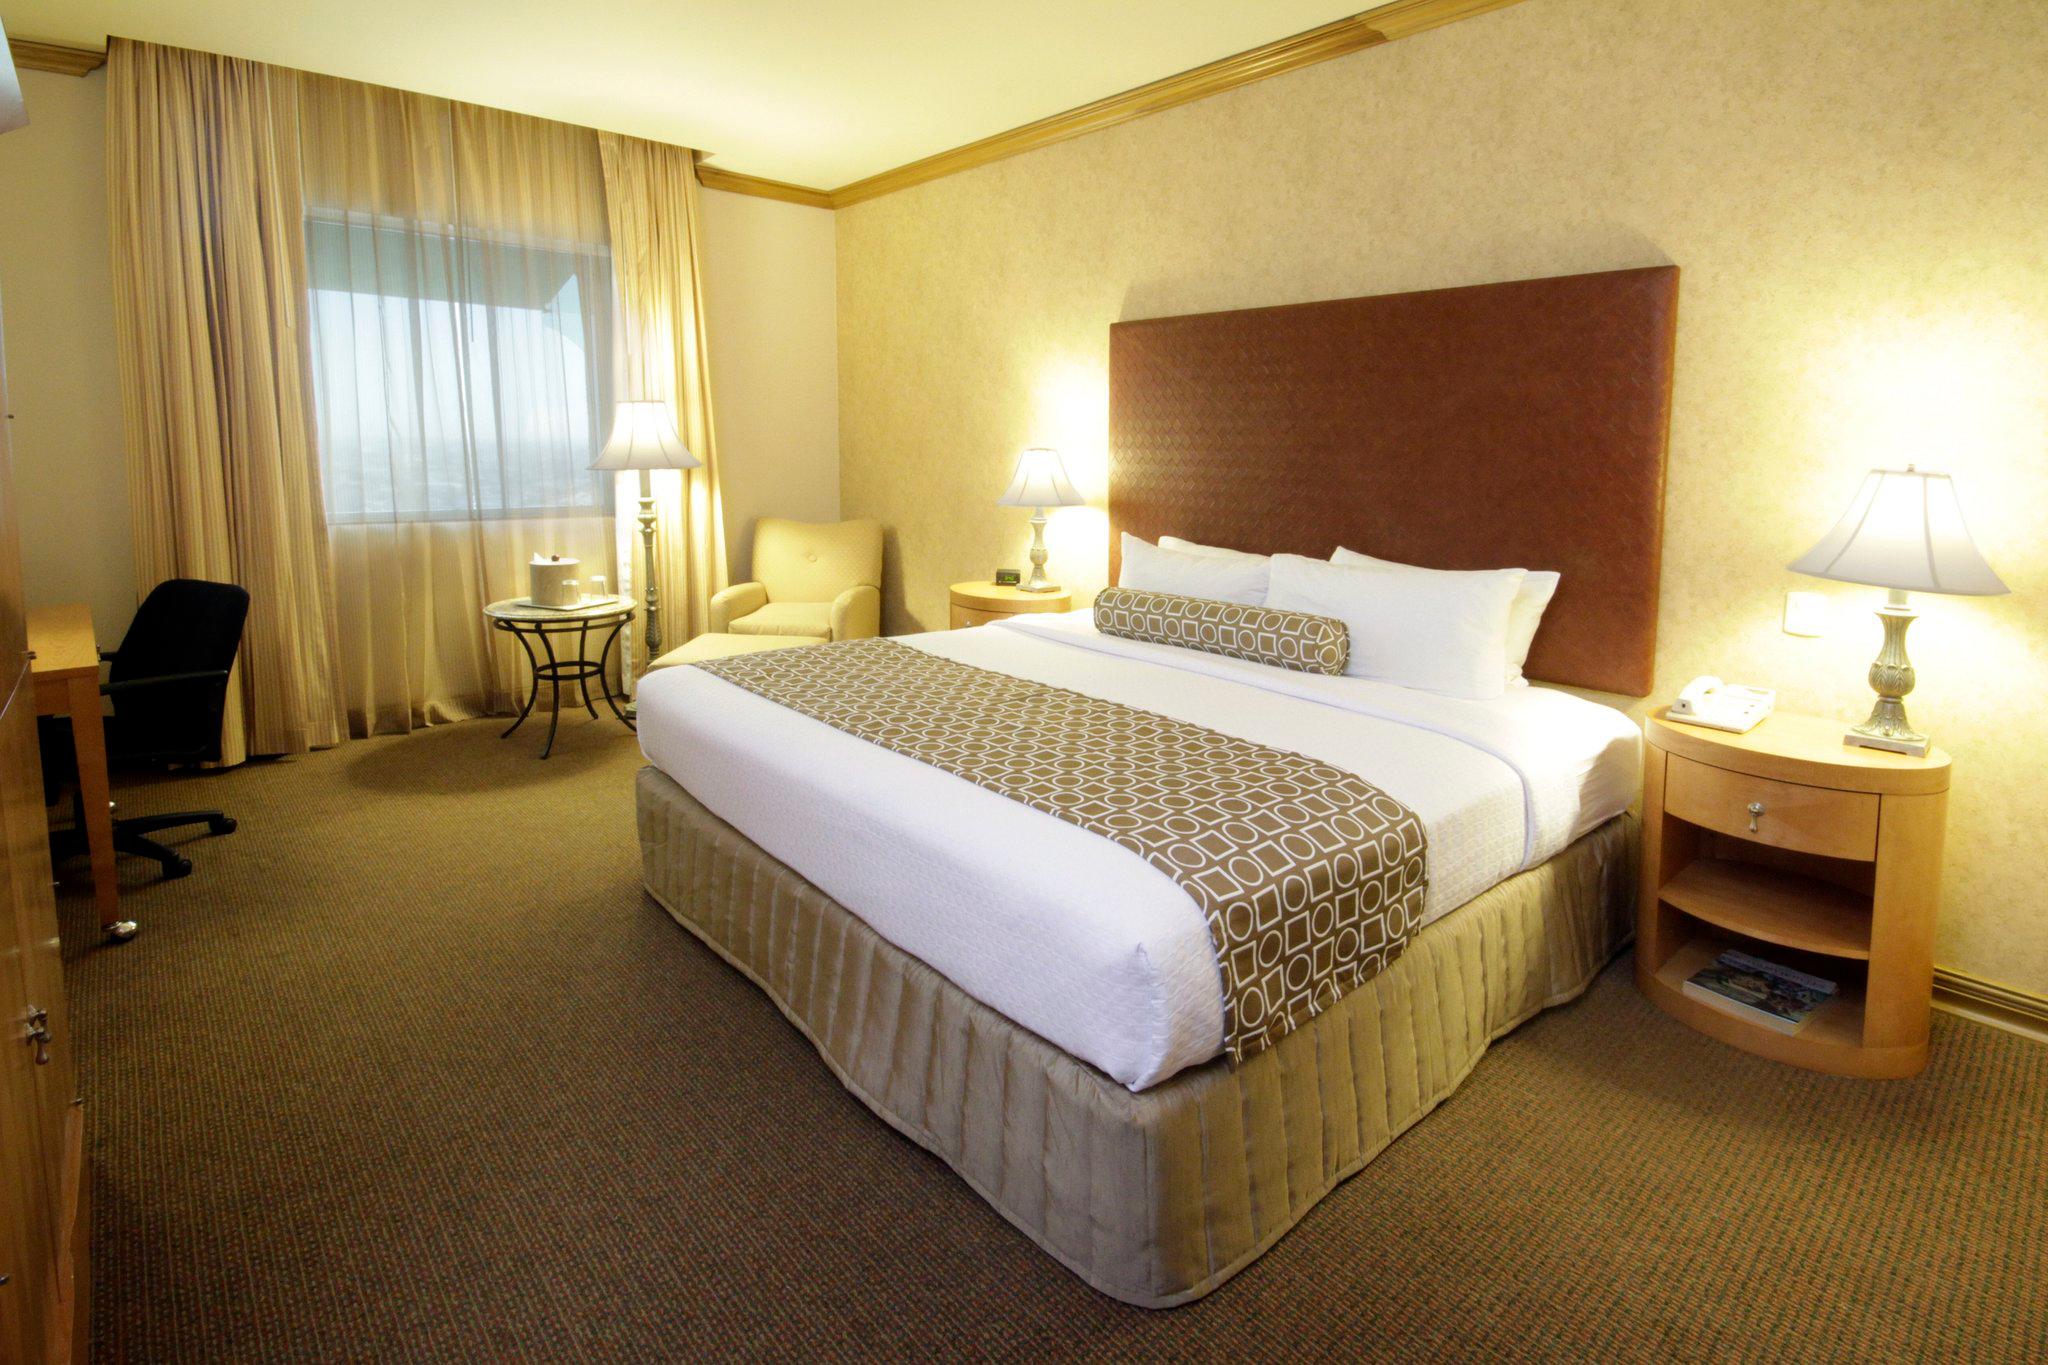 Images Crowne Plaza Torreon, an IHG Hotel